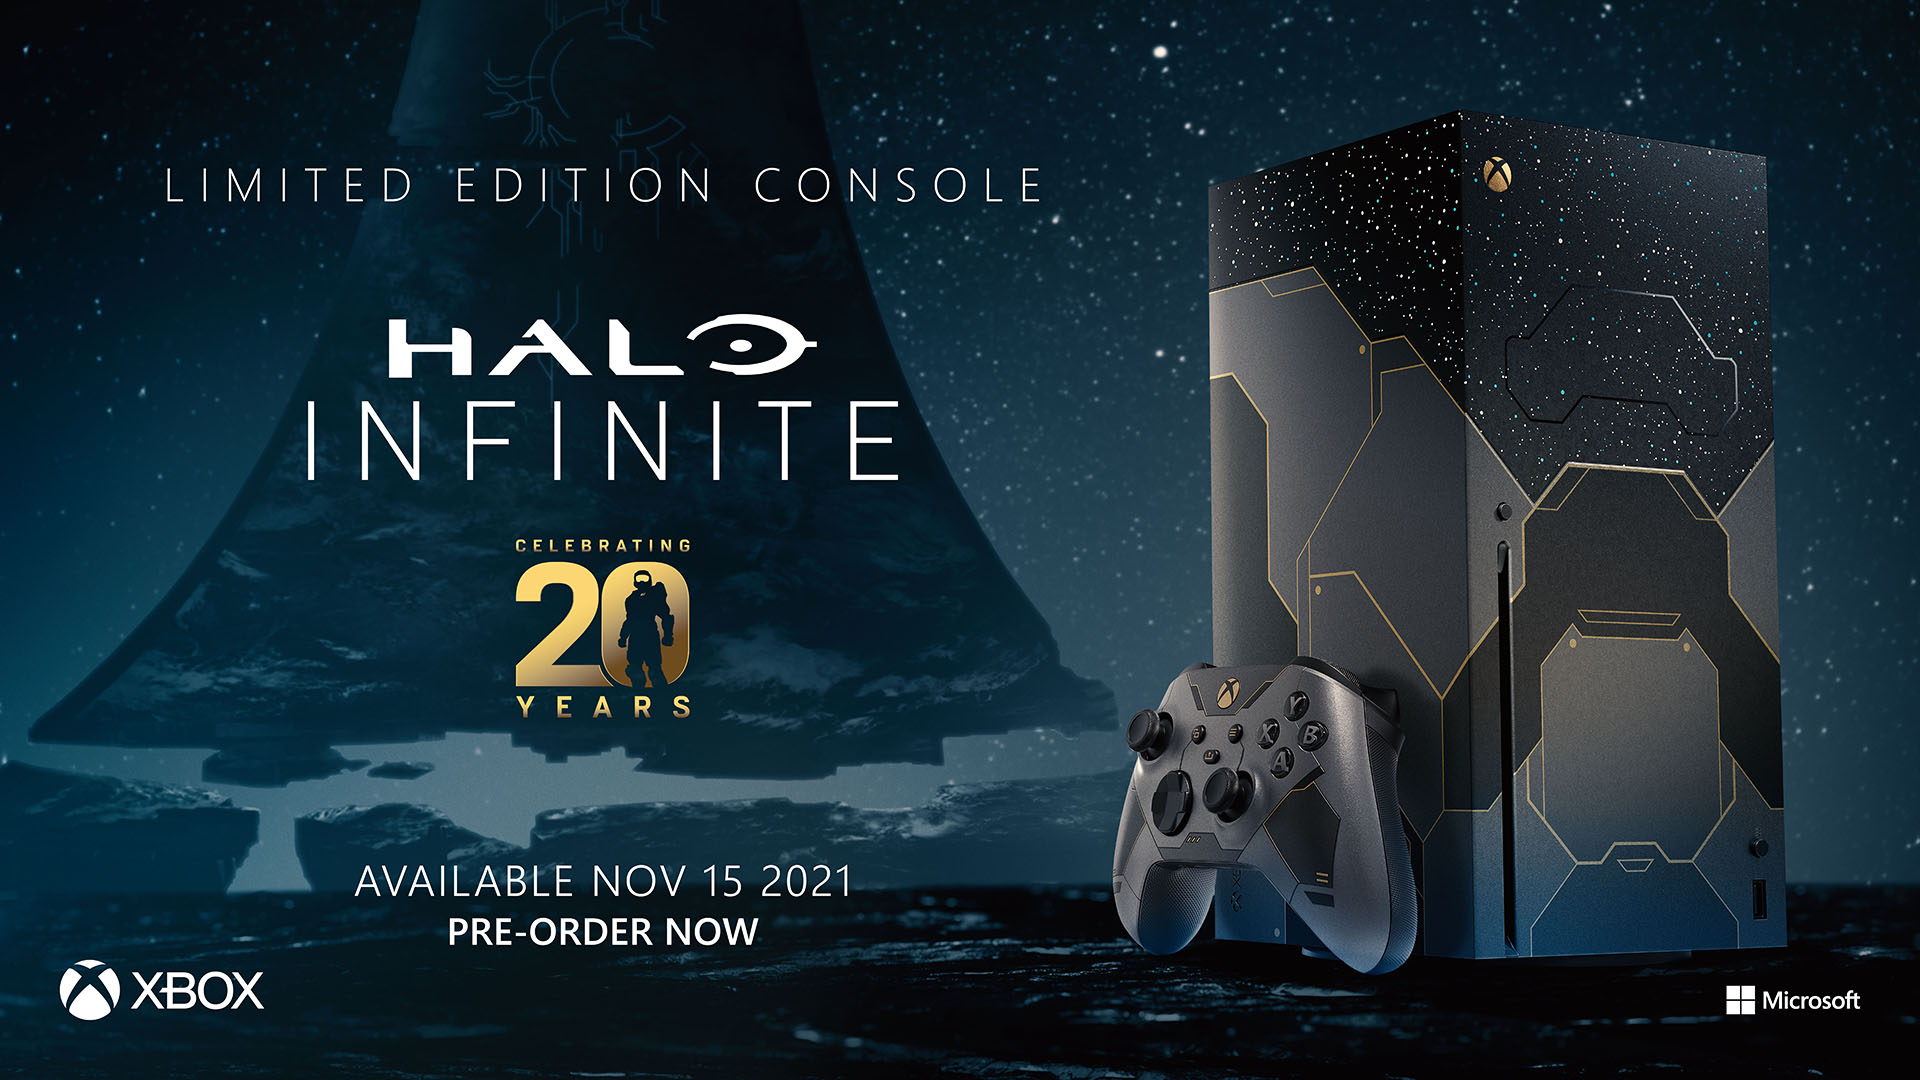 Limited edition Halo Infinite Xbox Series X console and controller for pre-order 